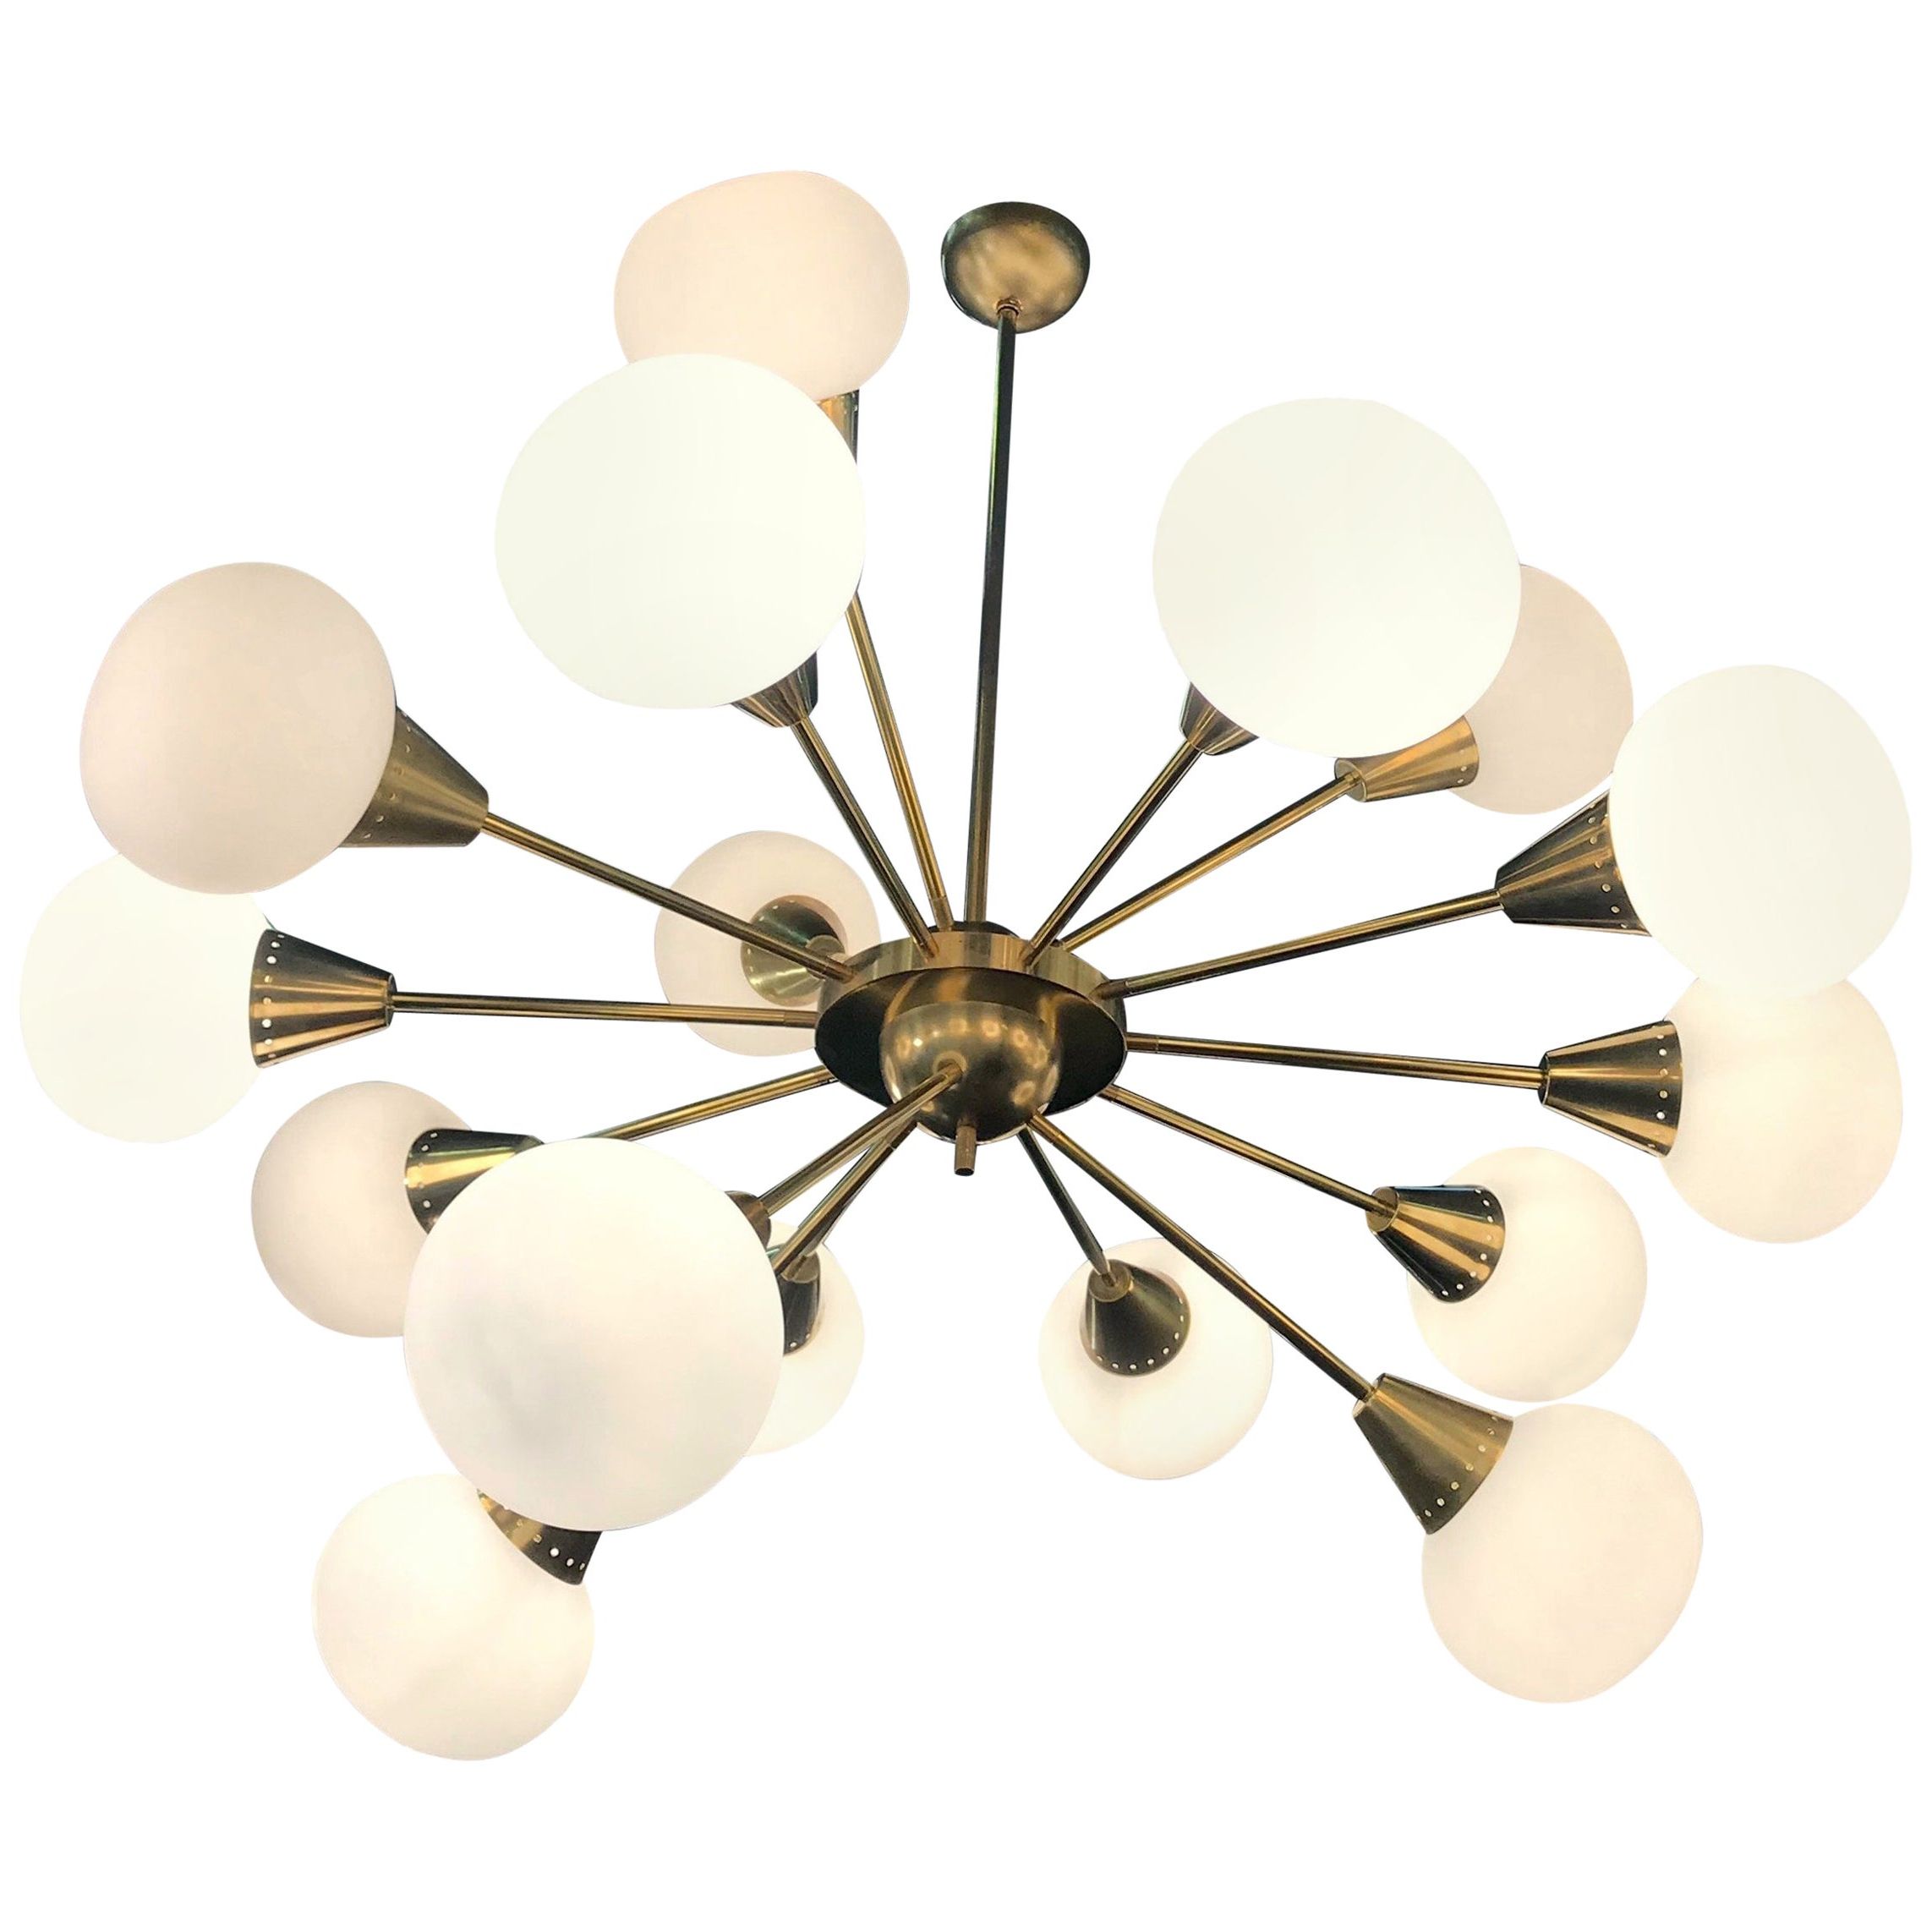 2019 Inclused Glass Orb Brass Sputnik Chandelier For Sale At Pertaining To Gold And Wood Sputnik Orb Chandeliers (View 17 of 21)